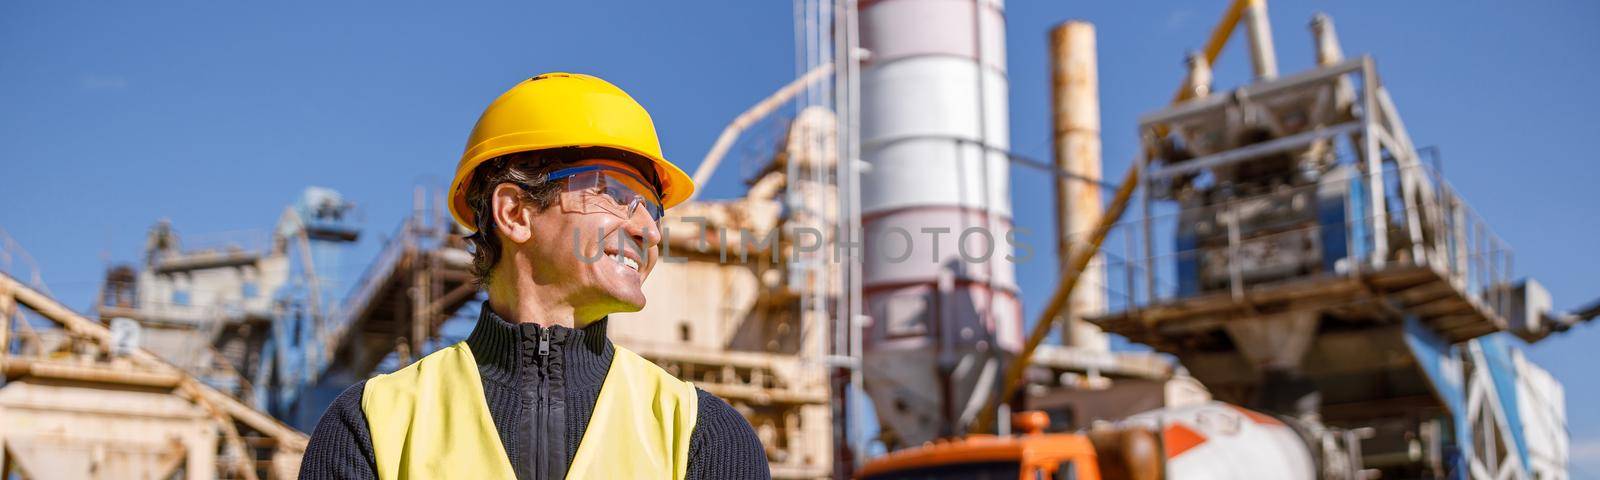 Joyful matured man factory worker wearing safety helmet and work vest while keeping arms crossed and smiling